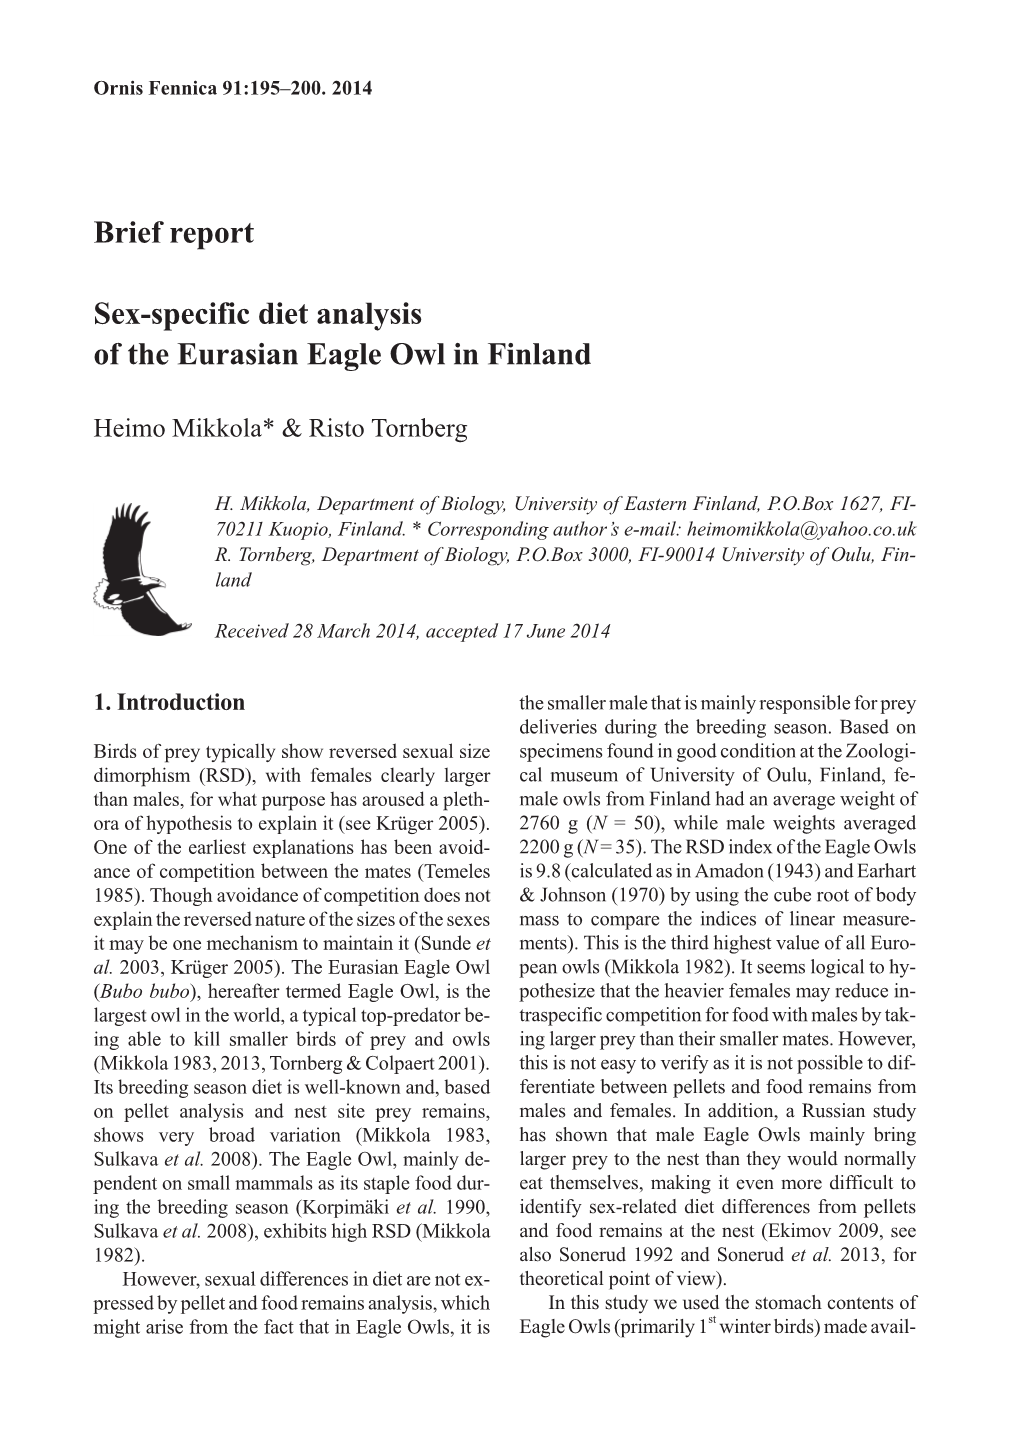 Brief Report Sex-Specific Diet Analysis of the Eurasian Eagle Owl in Finland